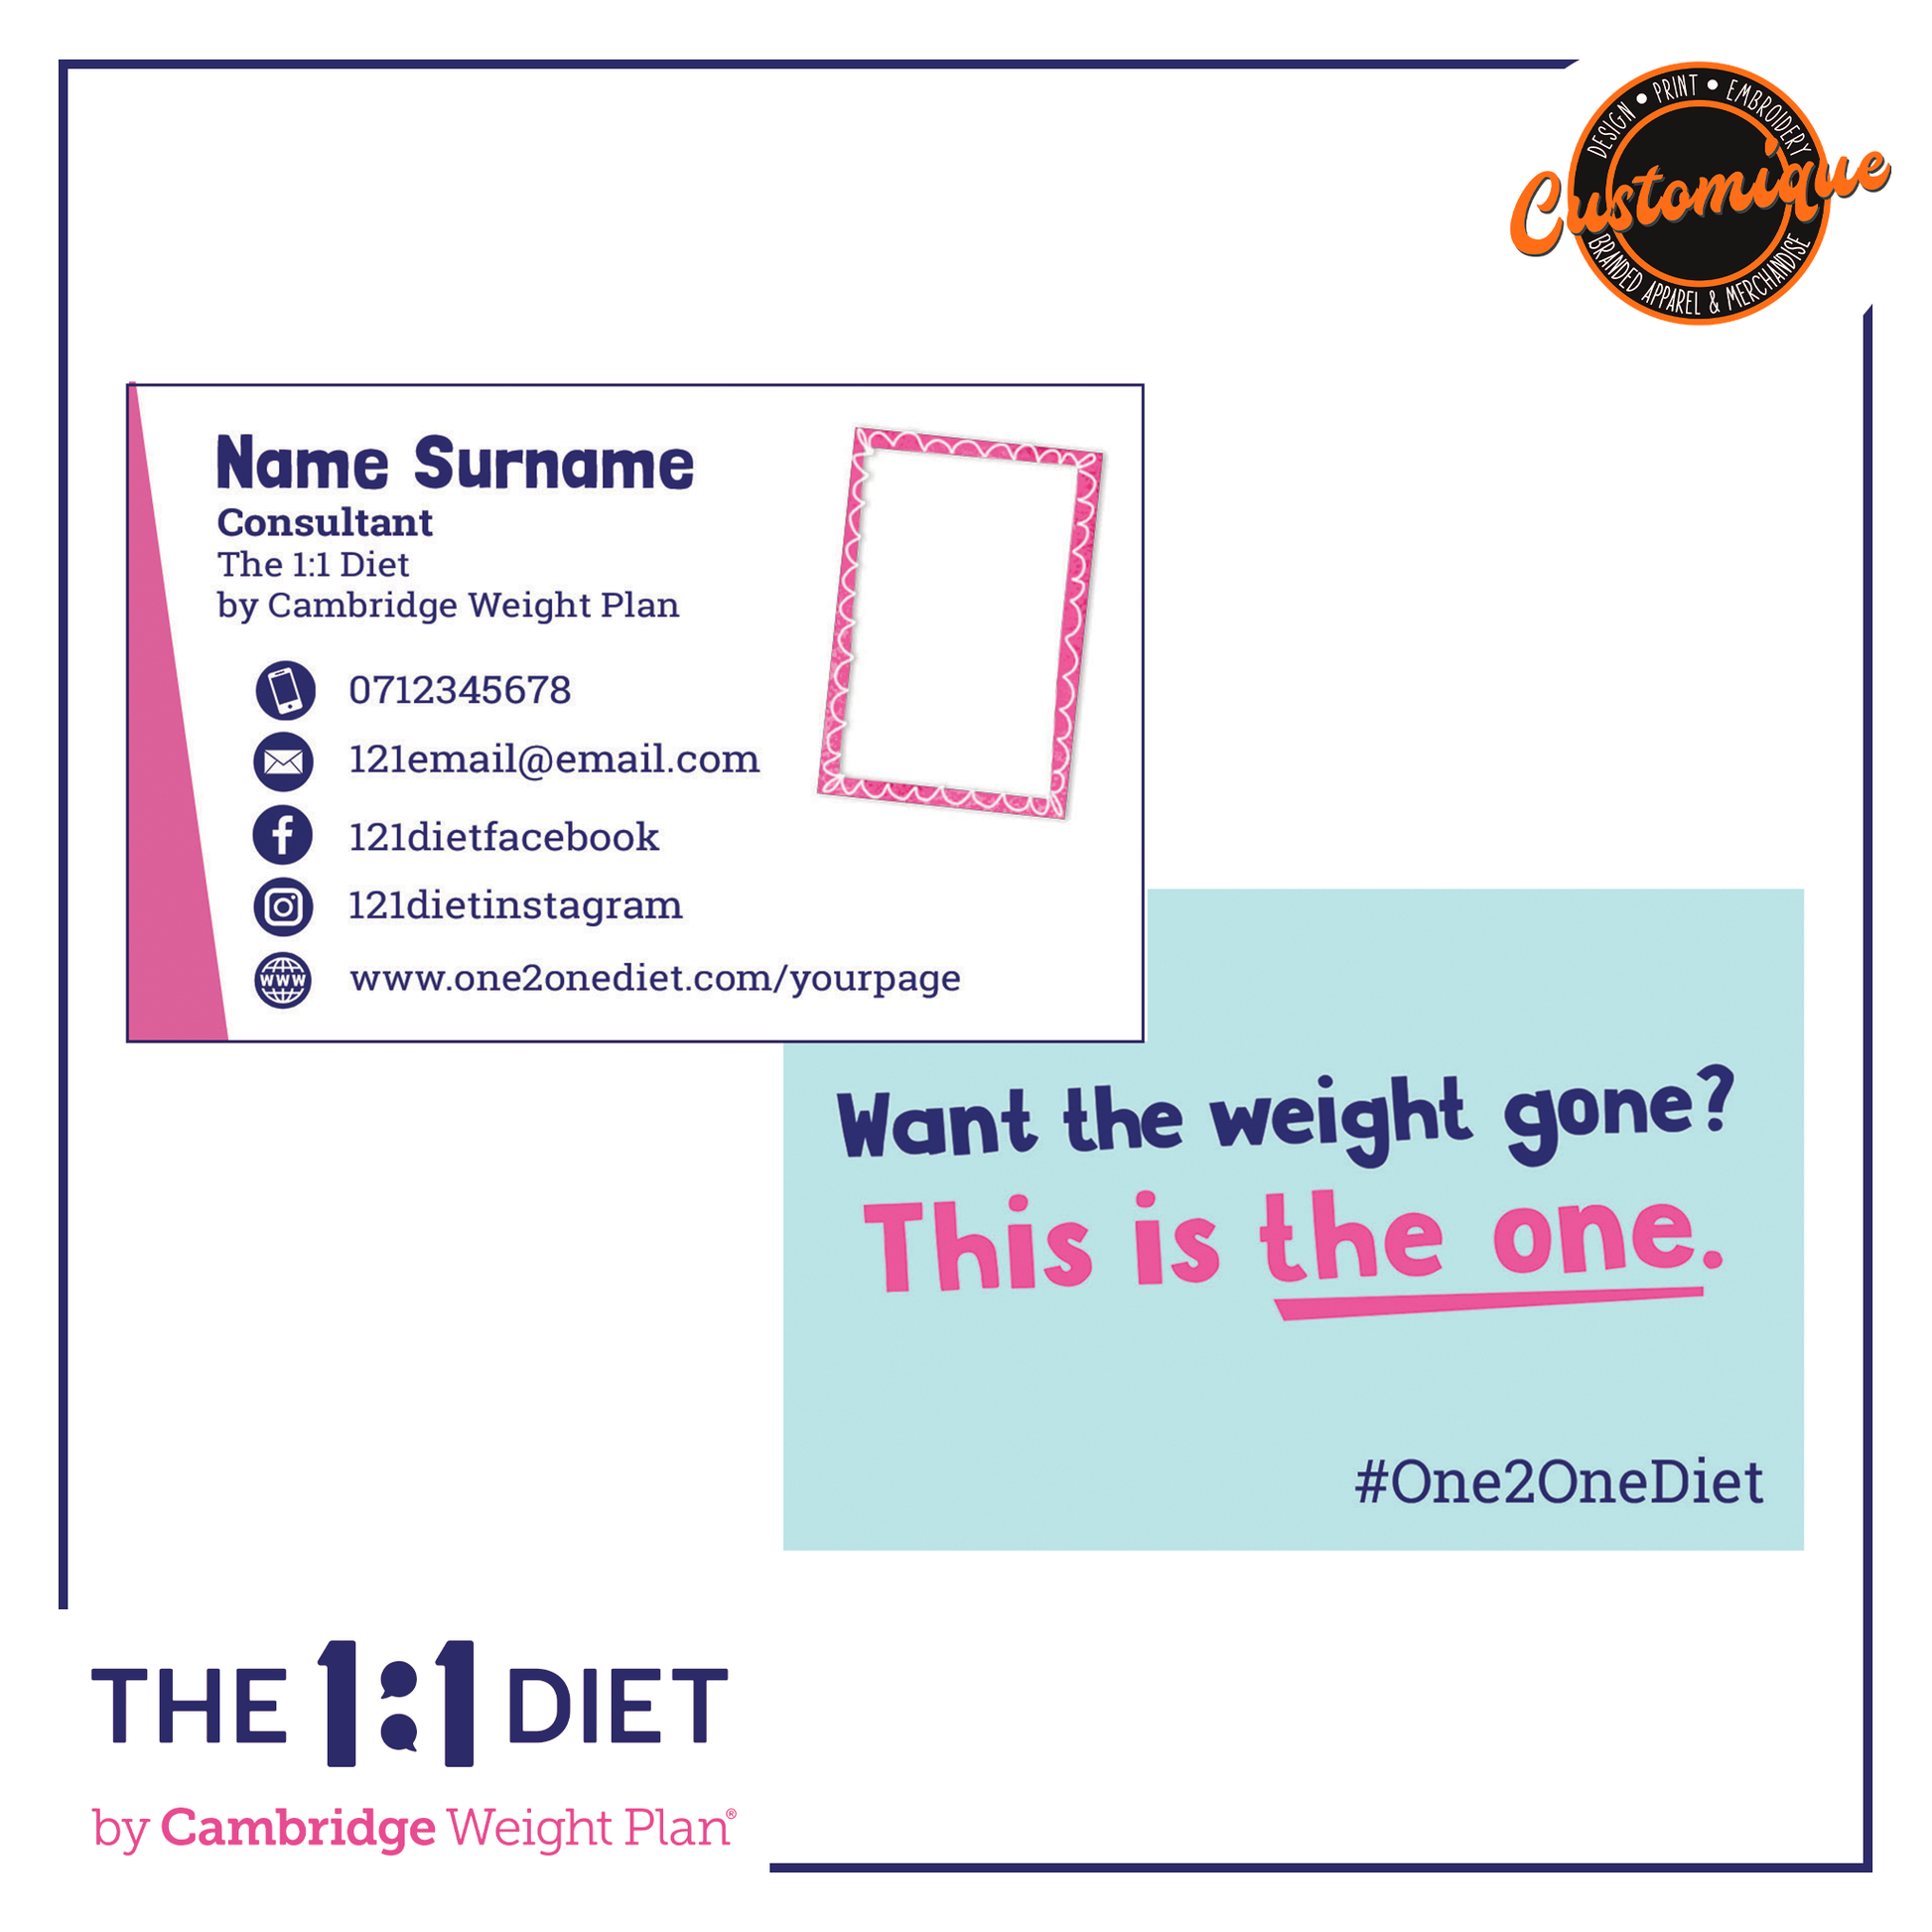 the 1:1 diet photograph business cards